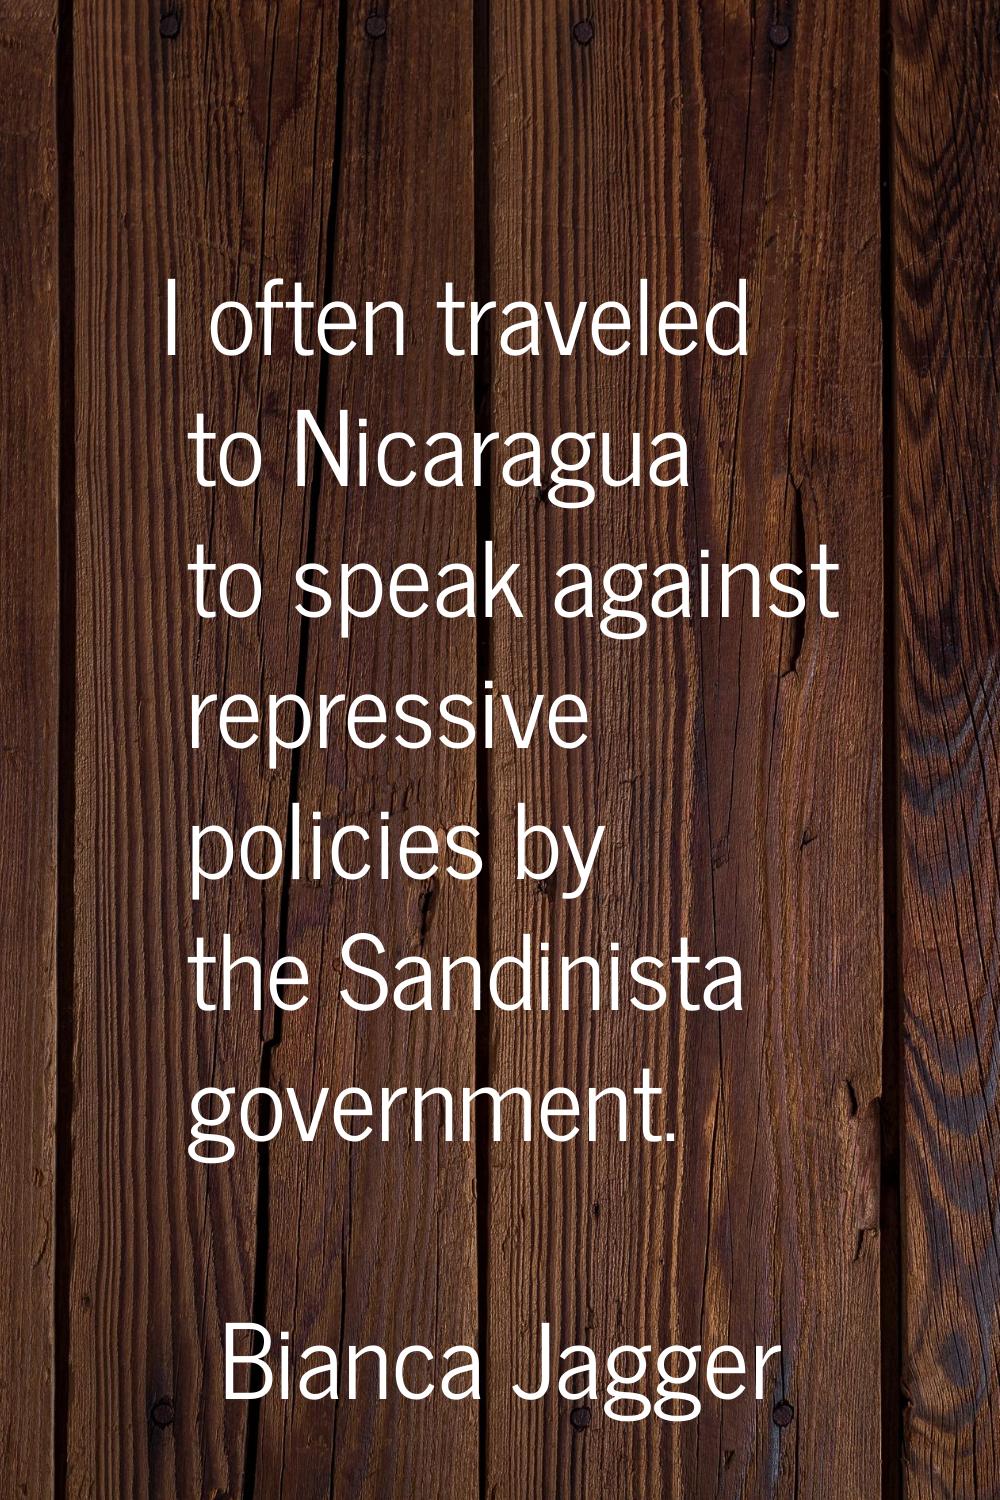 I often traveled to Nicaragua to speak against repressive policies by the Sandinista government.